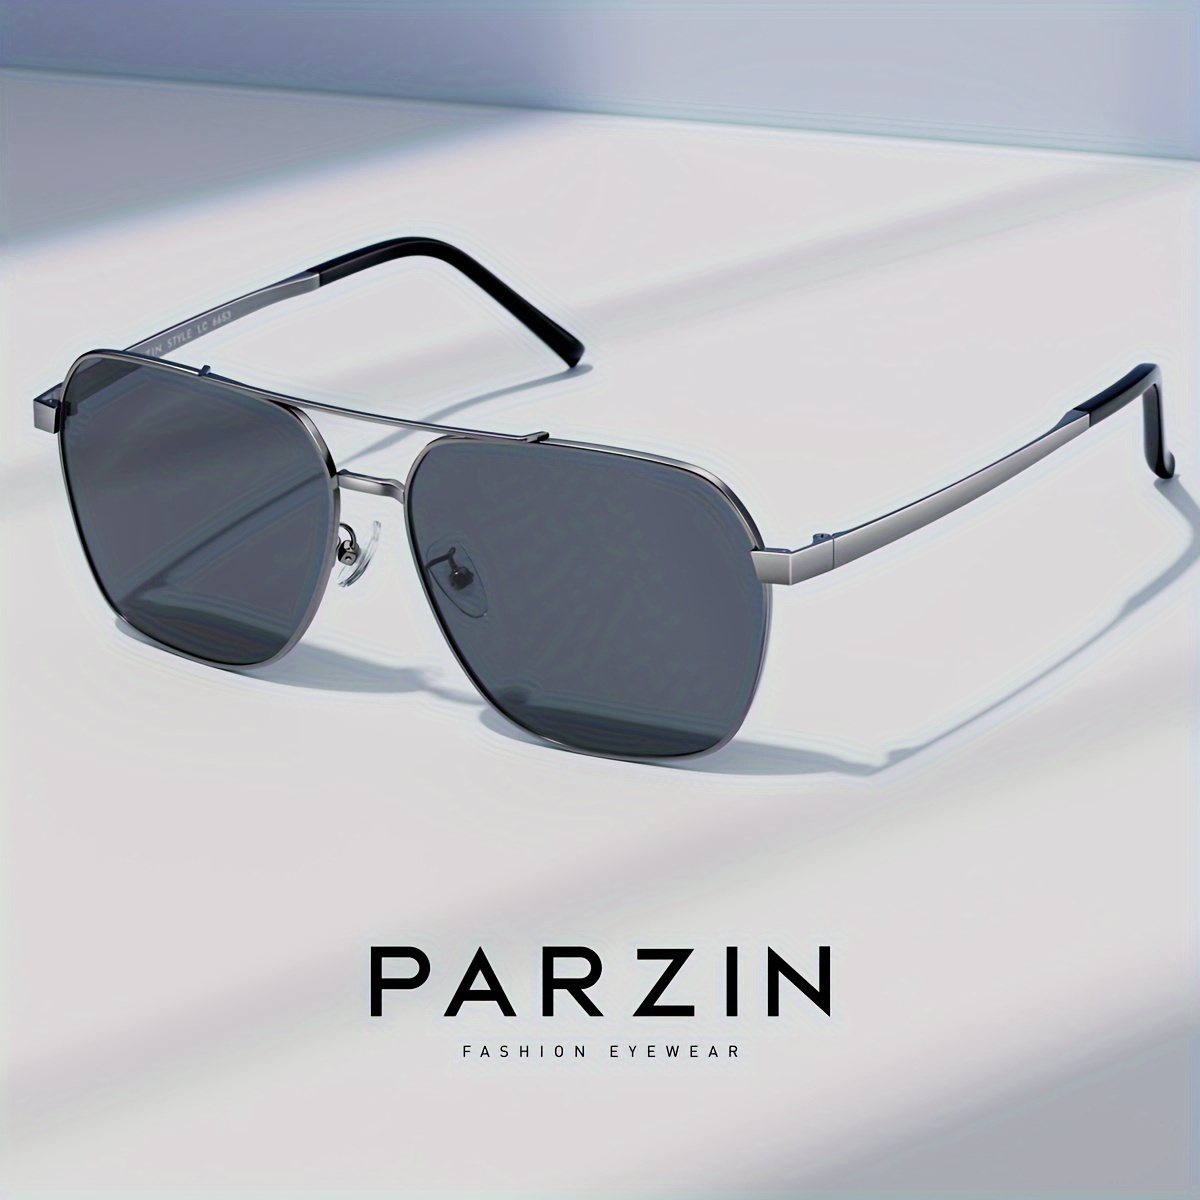 

Parzin, Premium Cool Trendy Polarized Glasses, Oversize Square Frame Double Bridges Retro Glasses, For Men Women Casual Business Outdoor Sports Party Vacation Travel Driving Fishing Supply Photo Prop